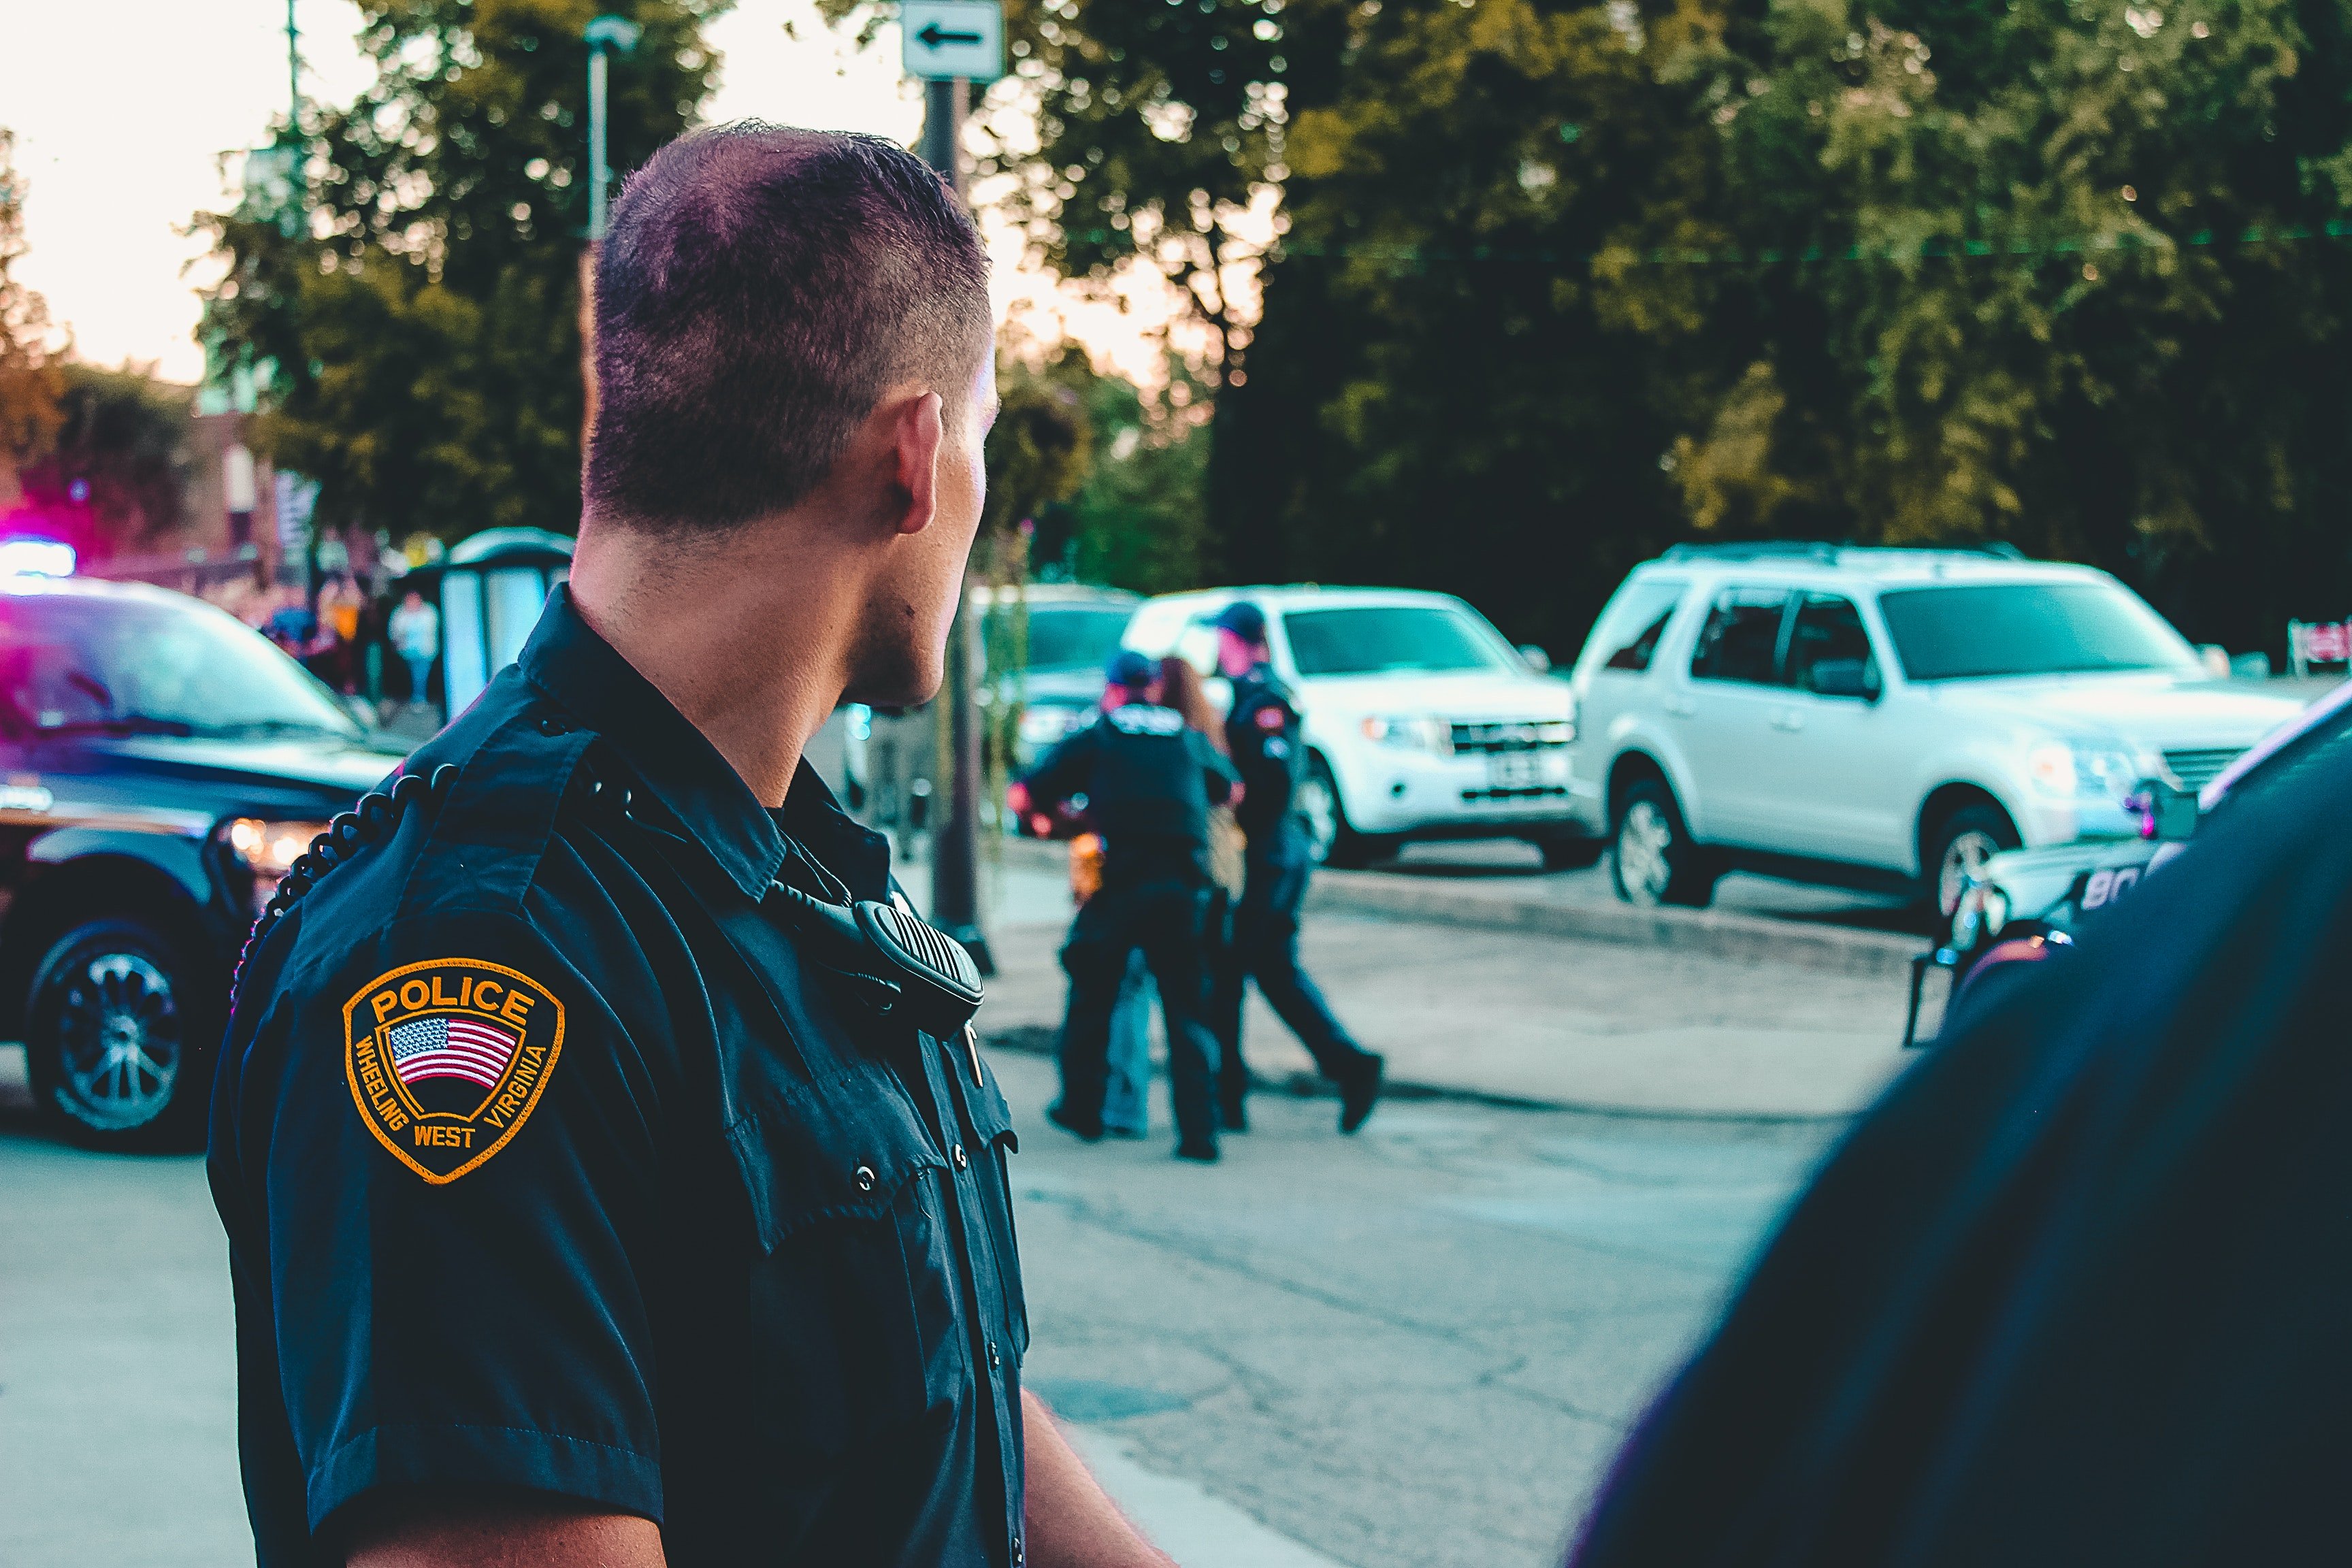 The woman is escorted by the cops | Photo: Pexels